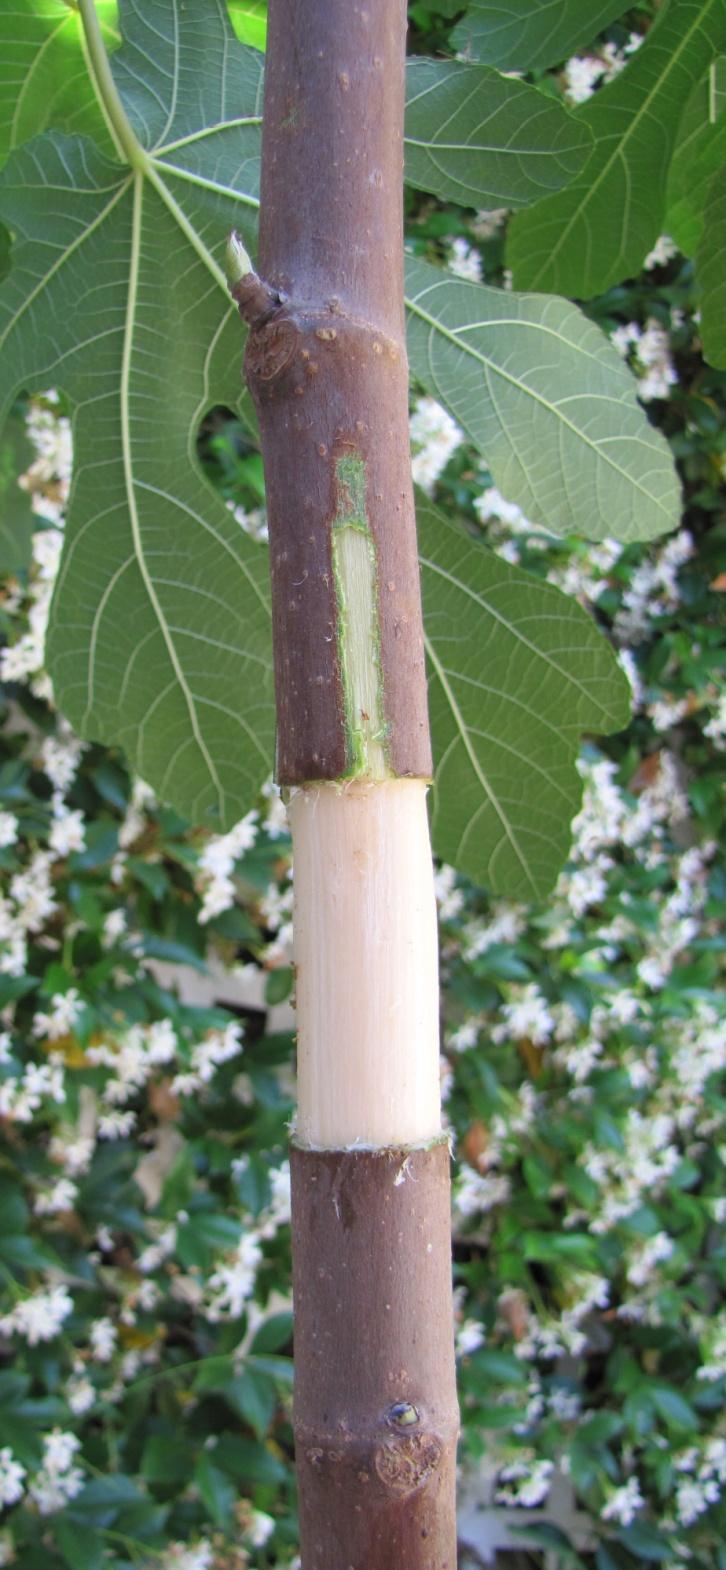 Applying the Air- Layers Wound the branch twice, on opposite sides of the branch, for a length of approximately 3"-5 above